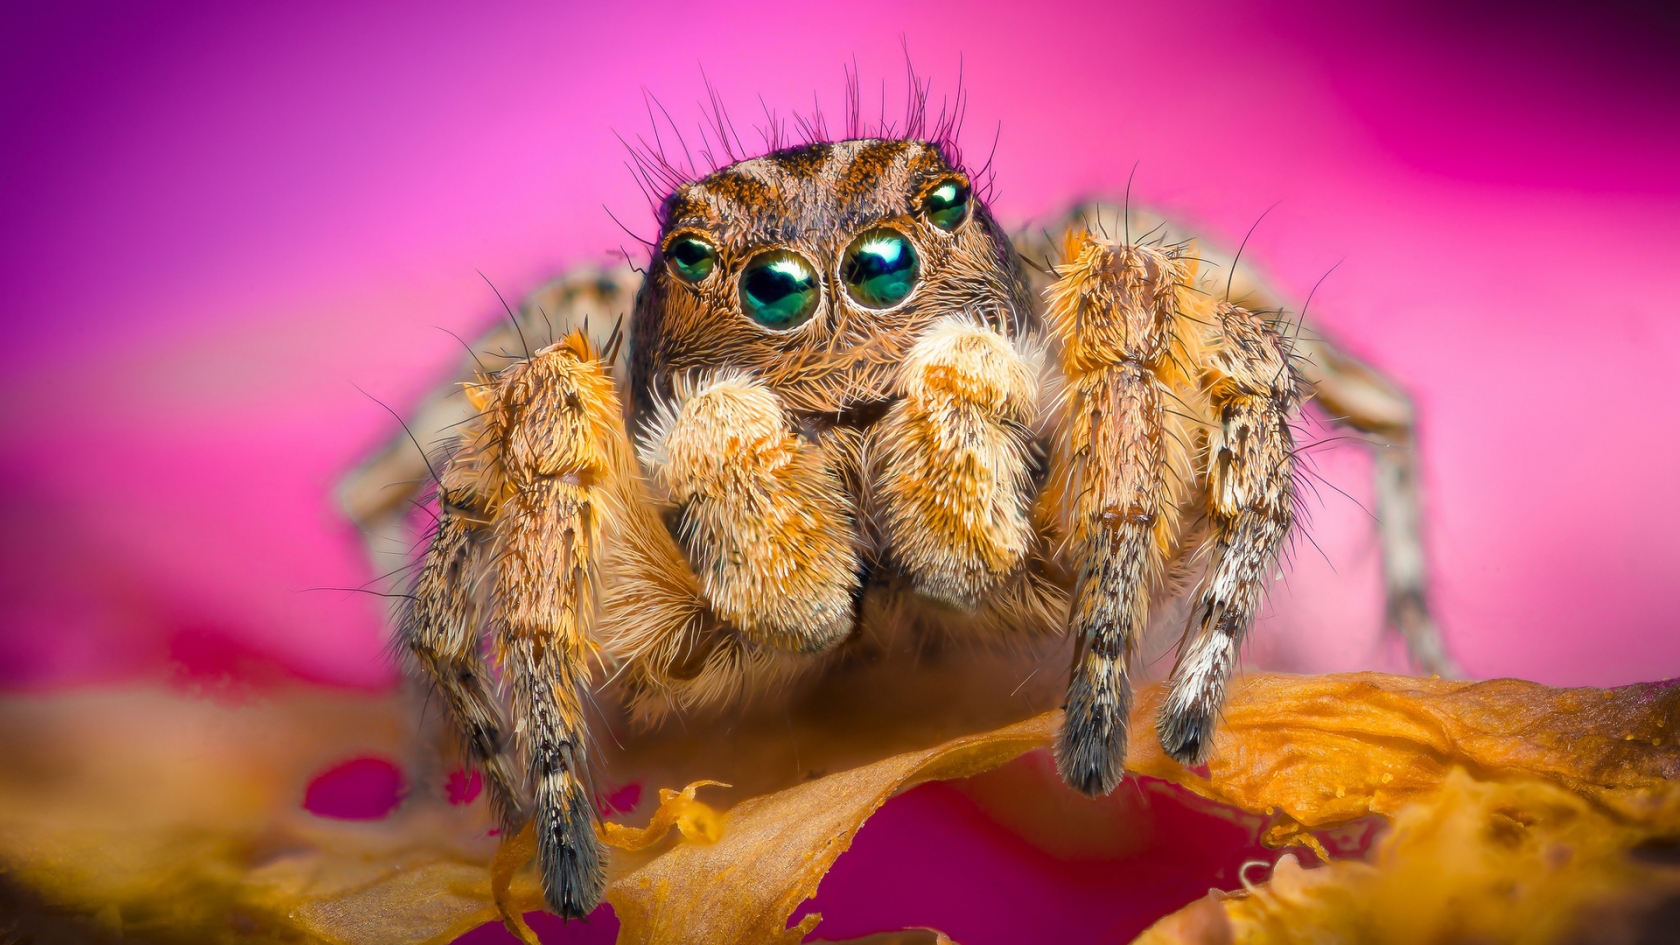 Jumping Spider for 1680 x 945 HDTV resolution